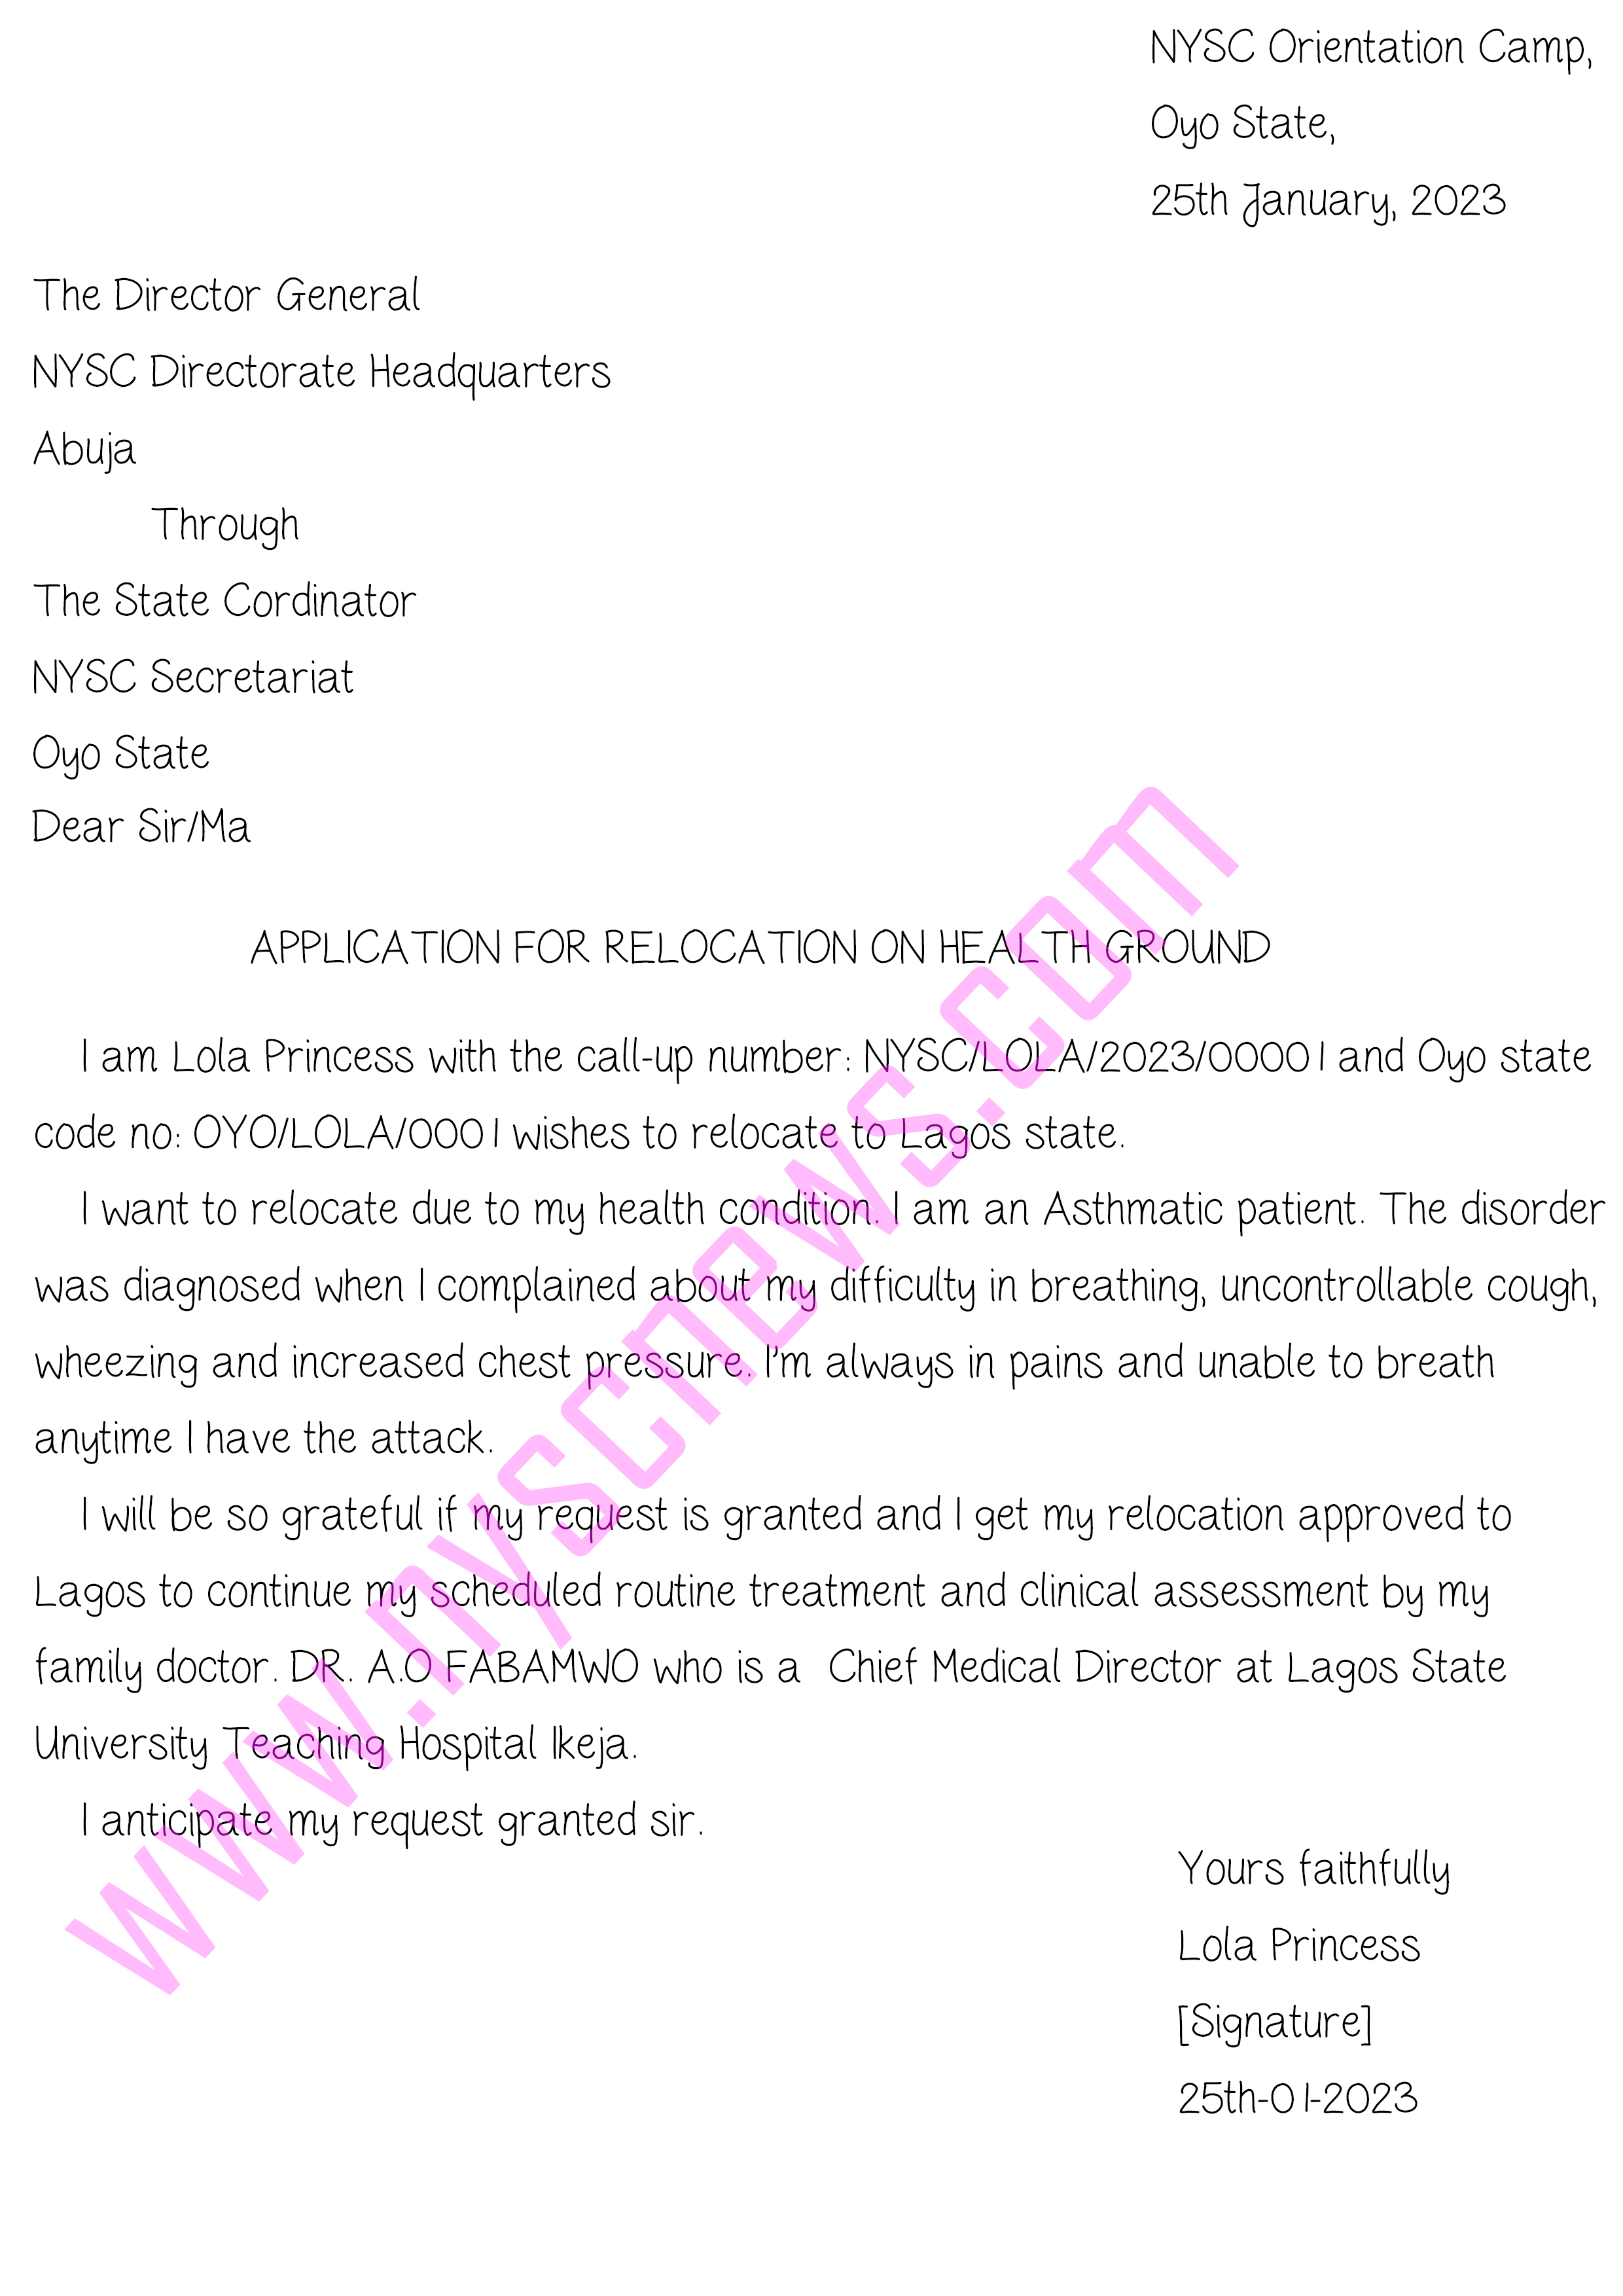 Sample Of NYSC Relocation On Health Ground